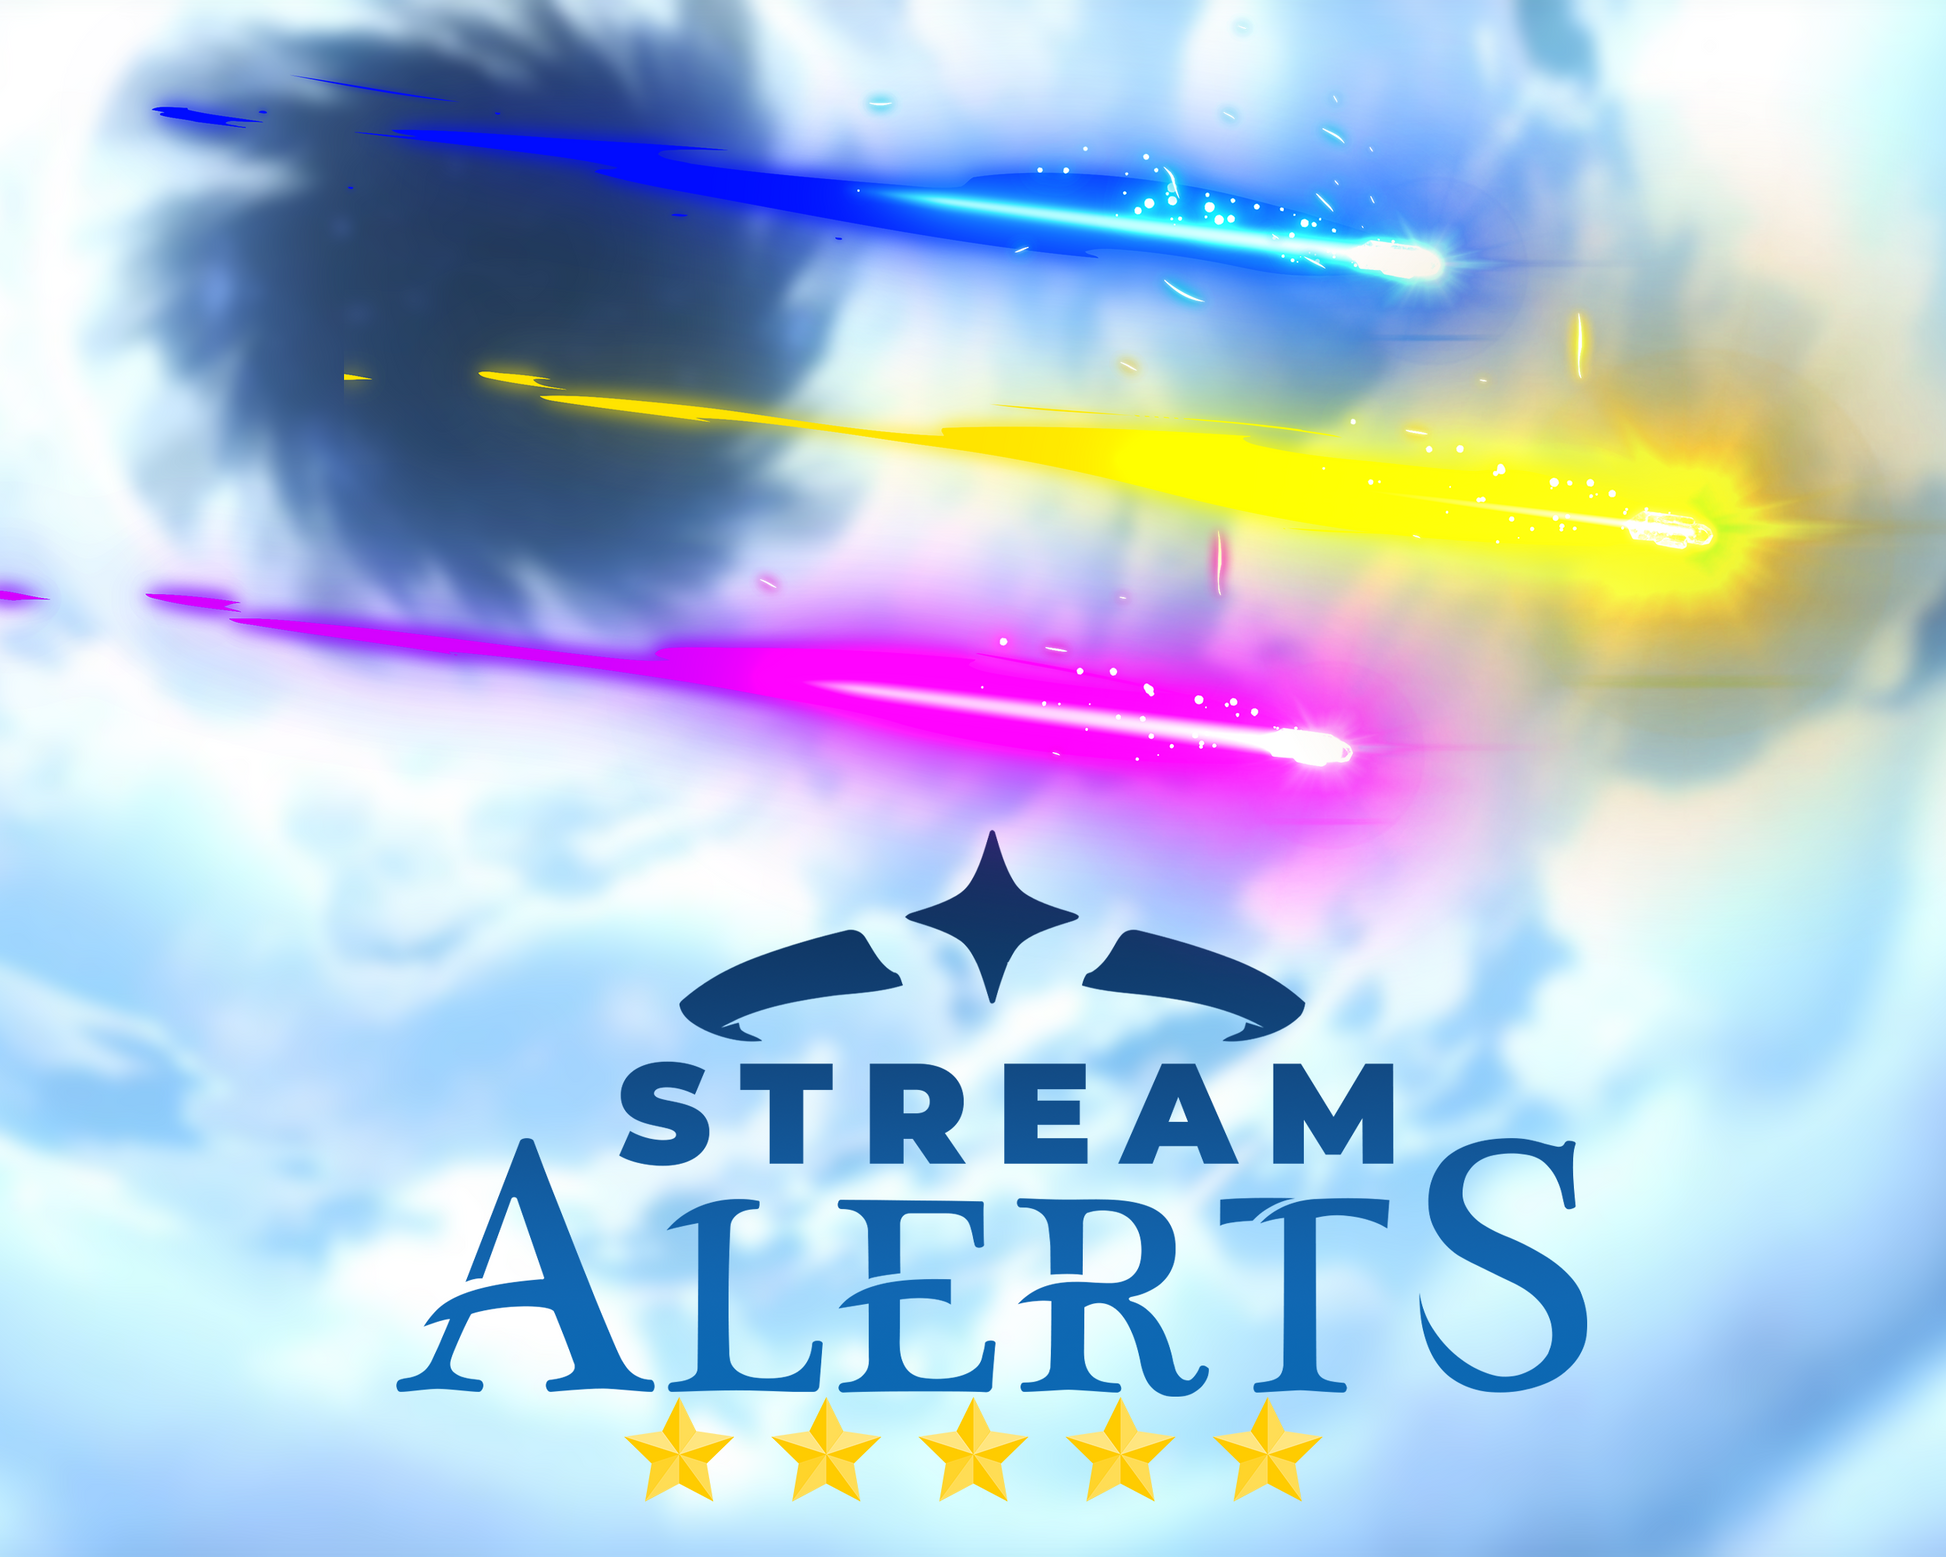 Genshin Impact Wish Alerts Pack for Twitch Streams, Animated Comet Alert Overlay, Follower Subscriber Cheer Raid Donation Gift, 3 Colors